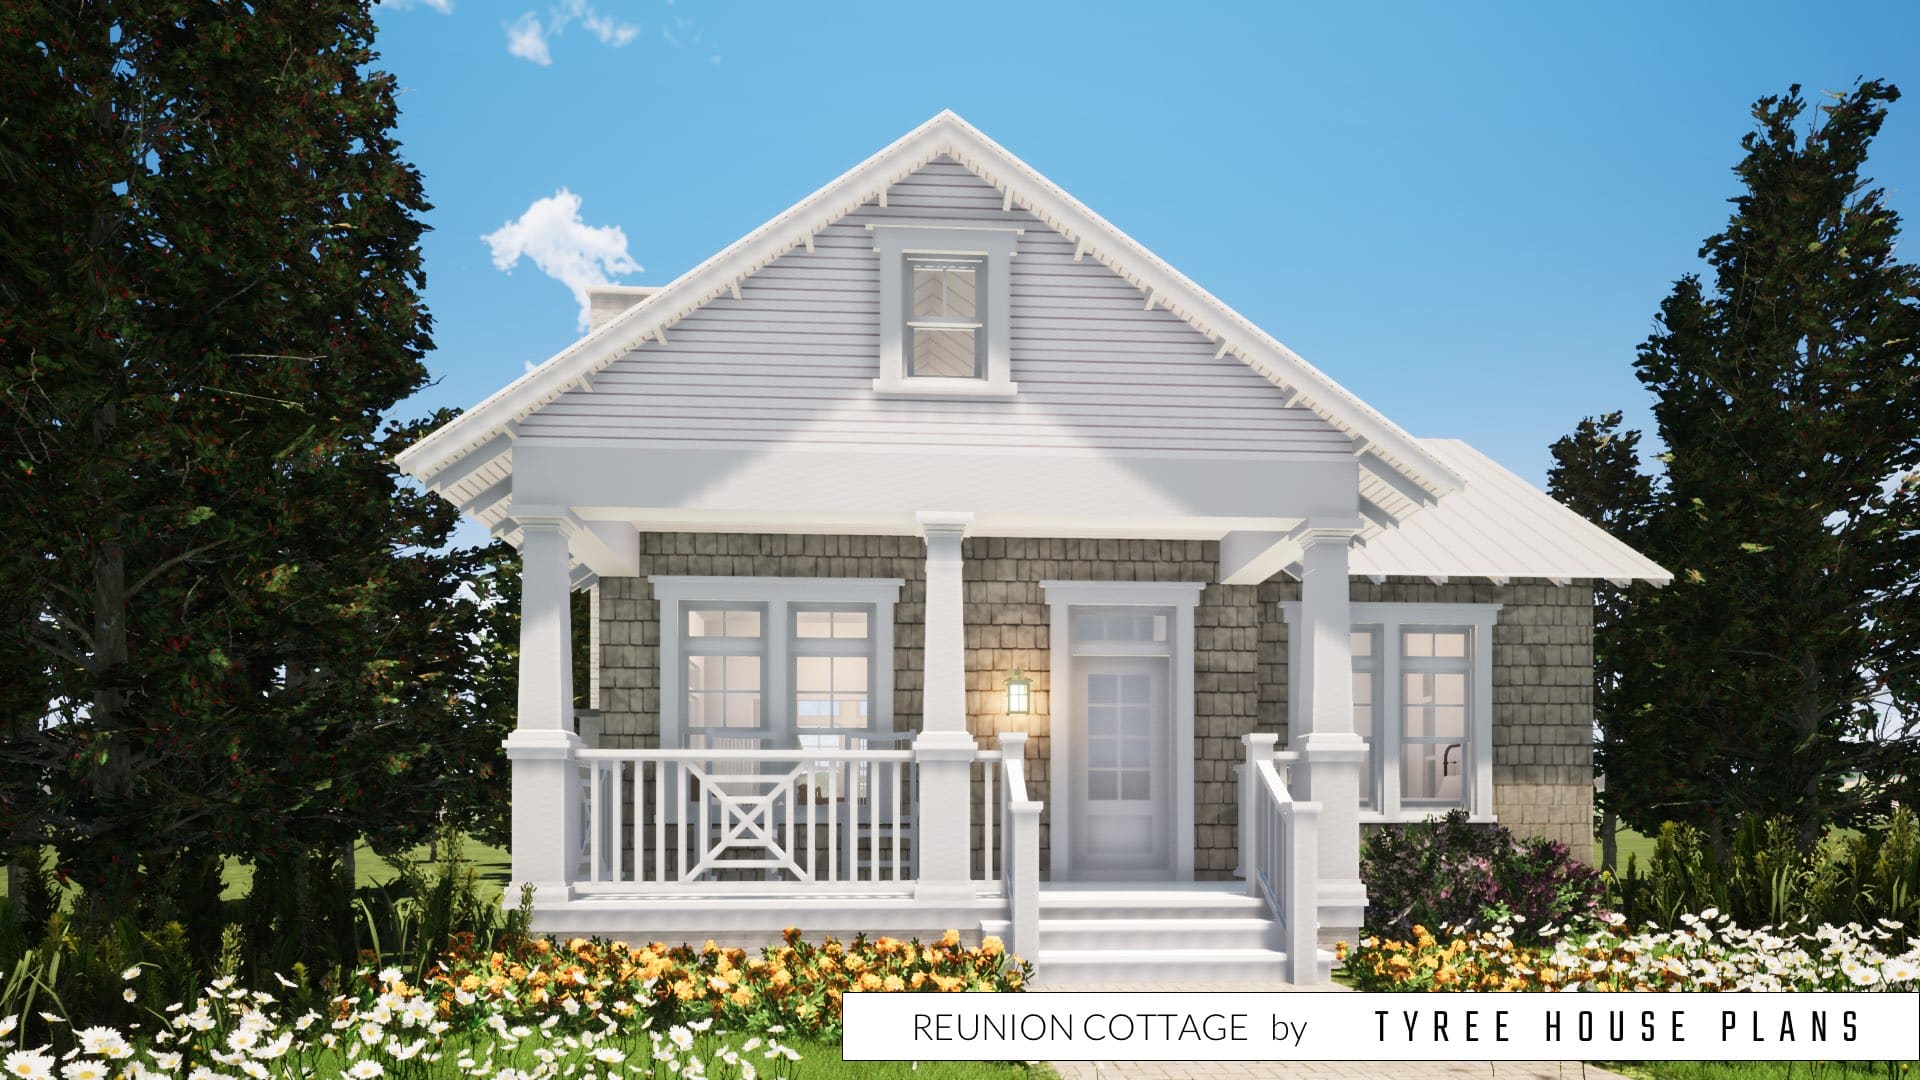 Reunion Cottage House Plan by Tyree House Plans